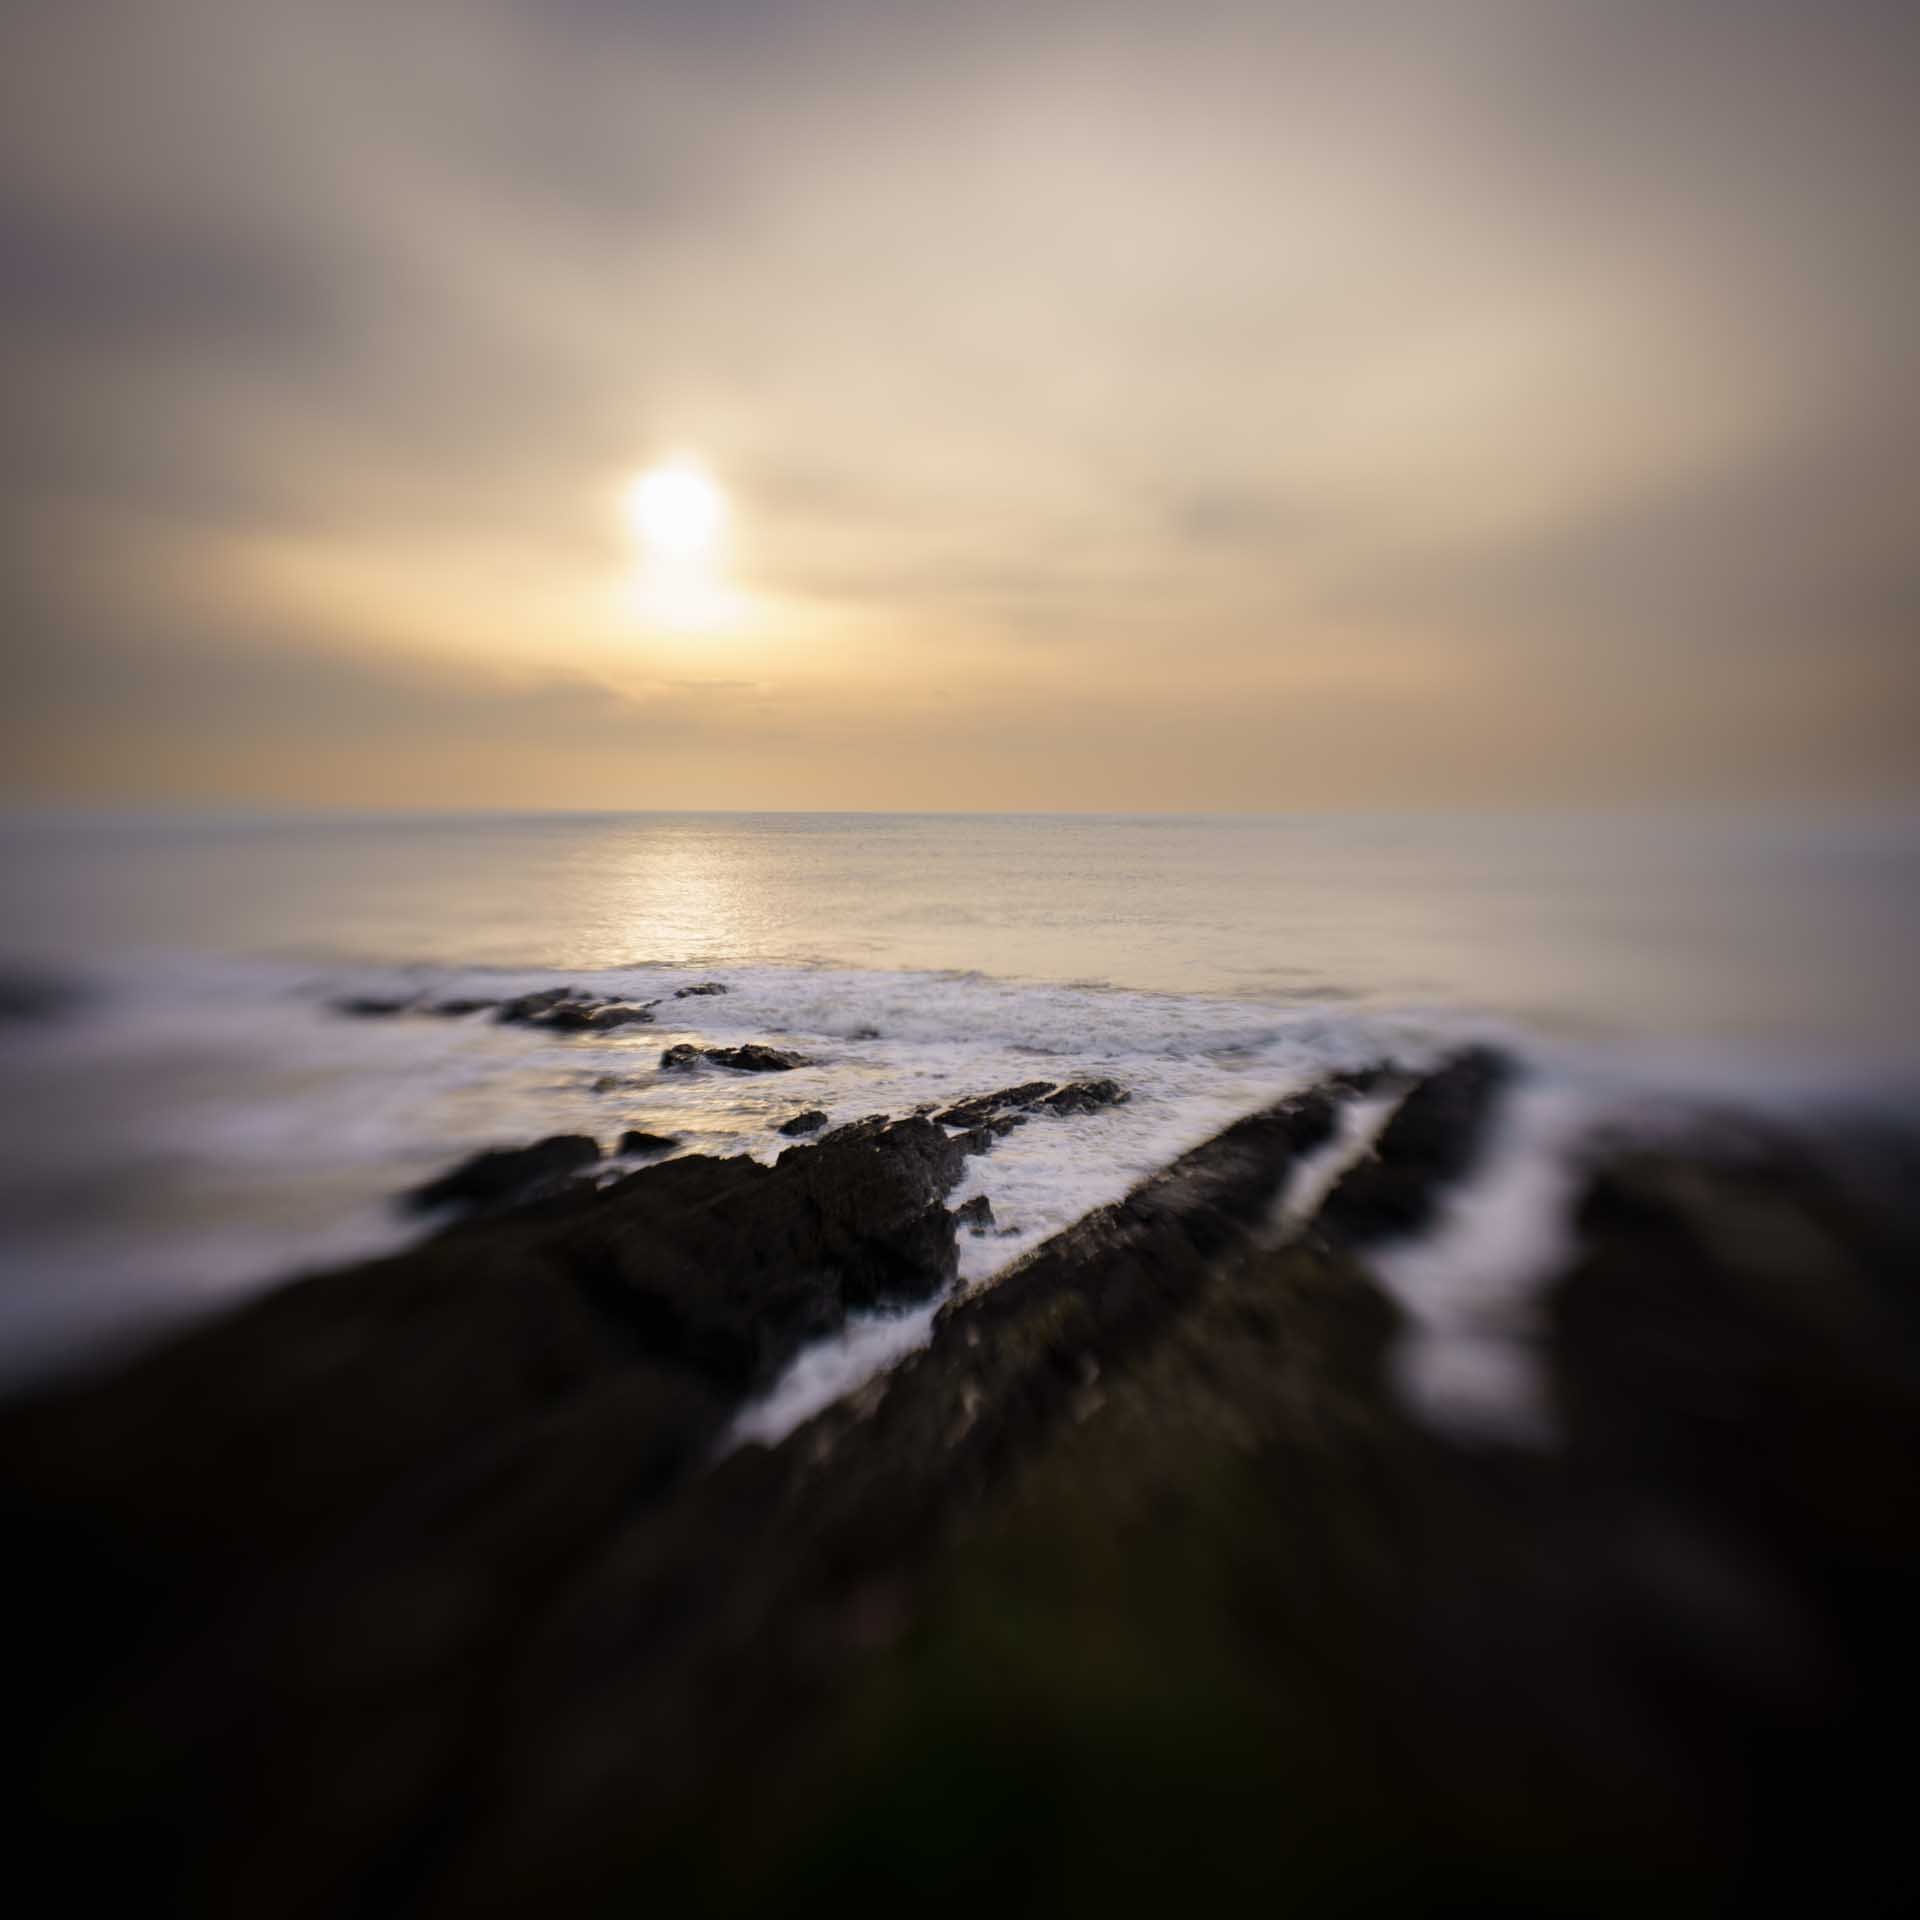 Lensbaby Sweet 22 on the Sony A7R IV